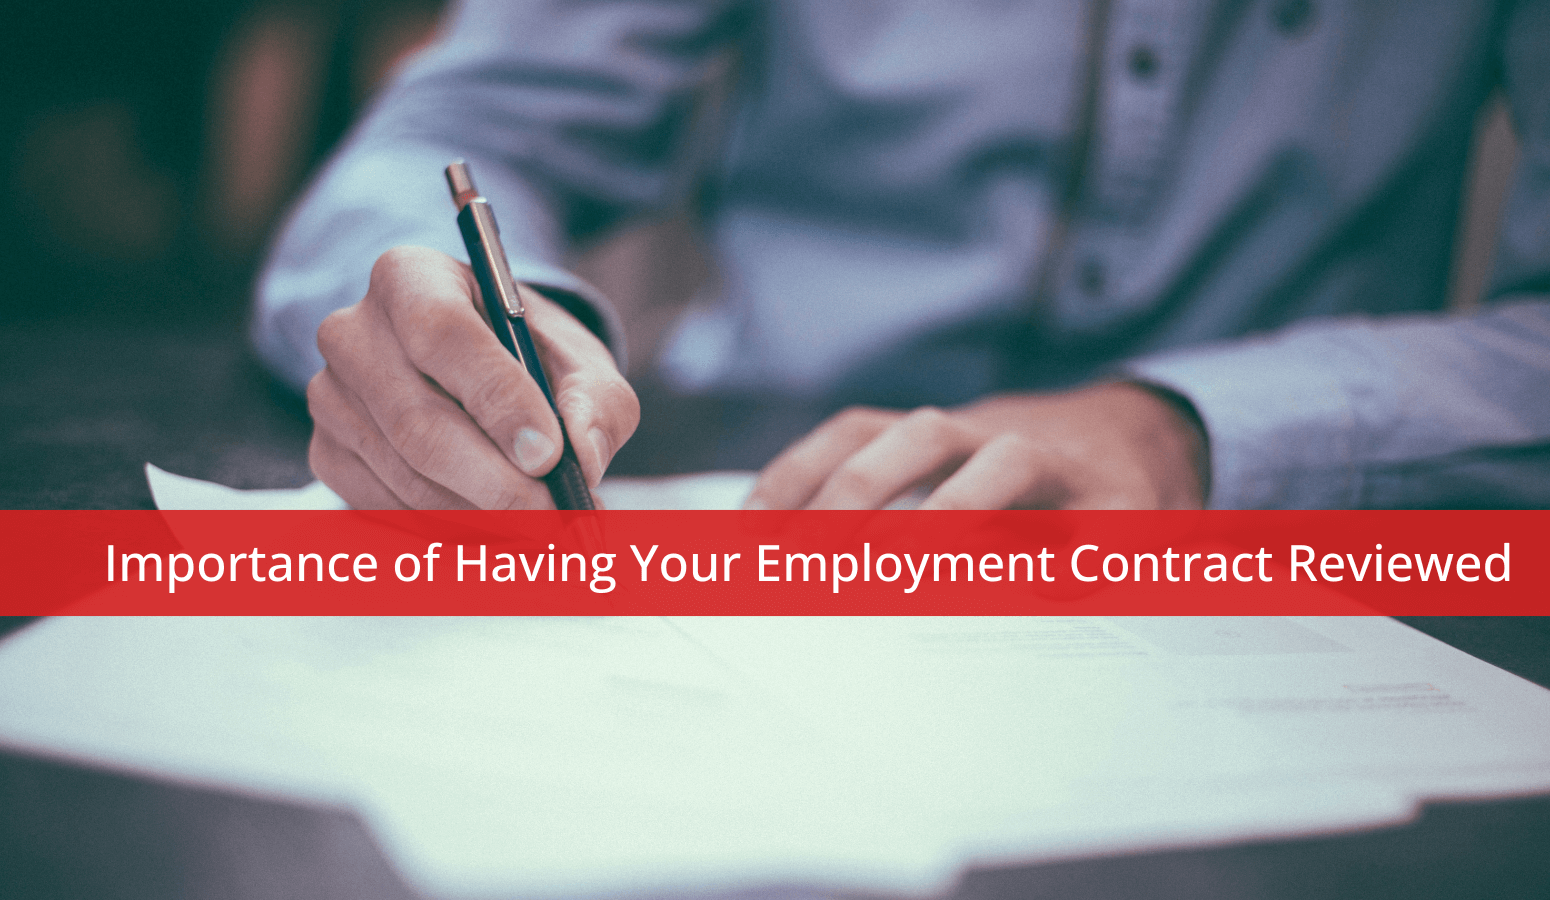 Featured image for “Importance of Having Your Employment Contract Reviewed”